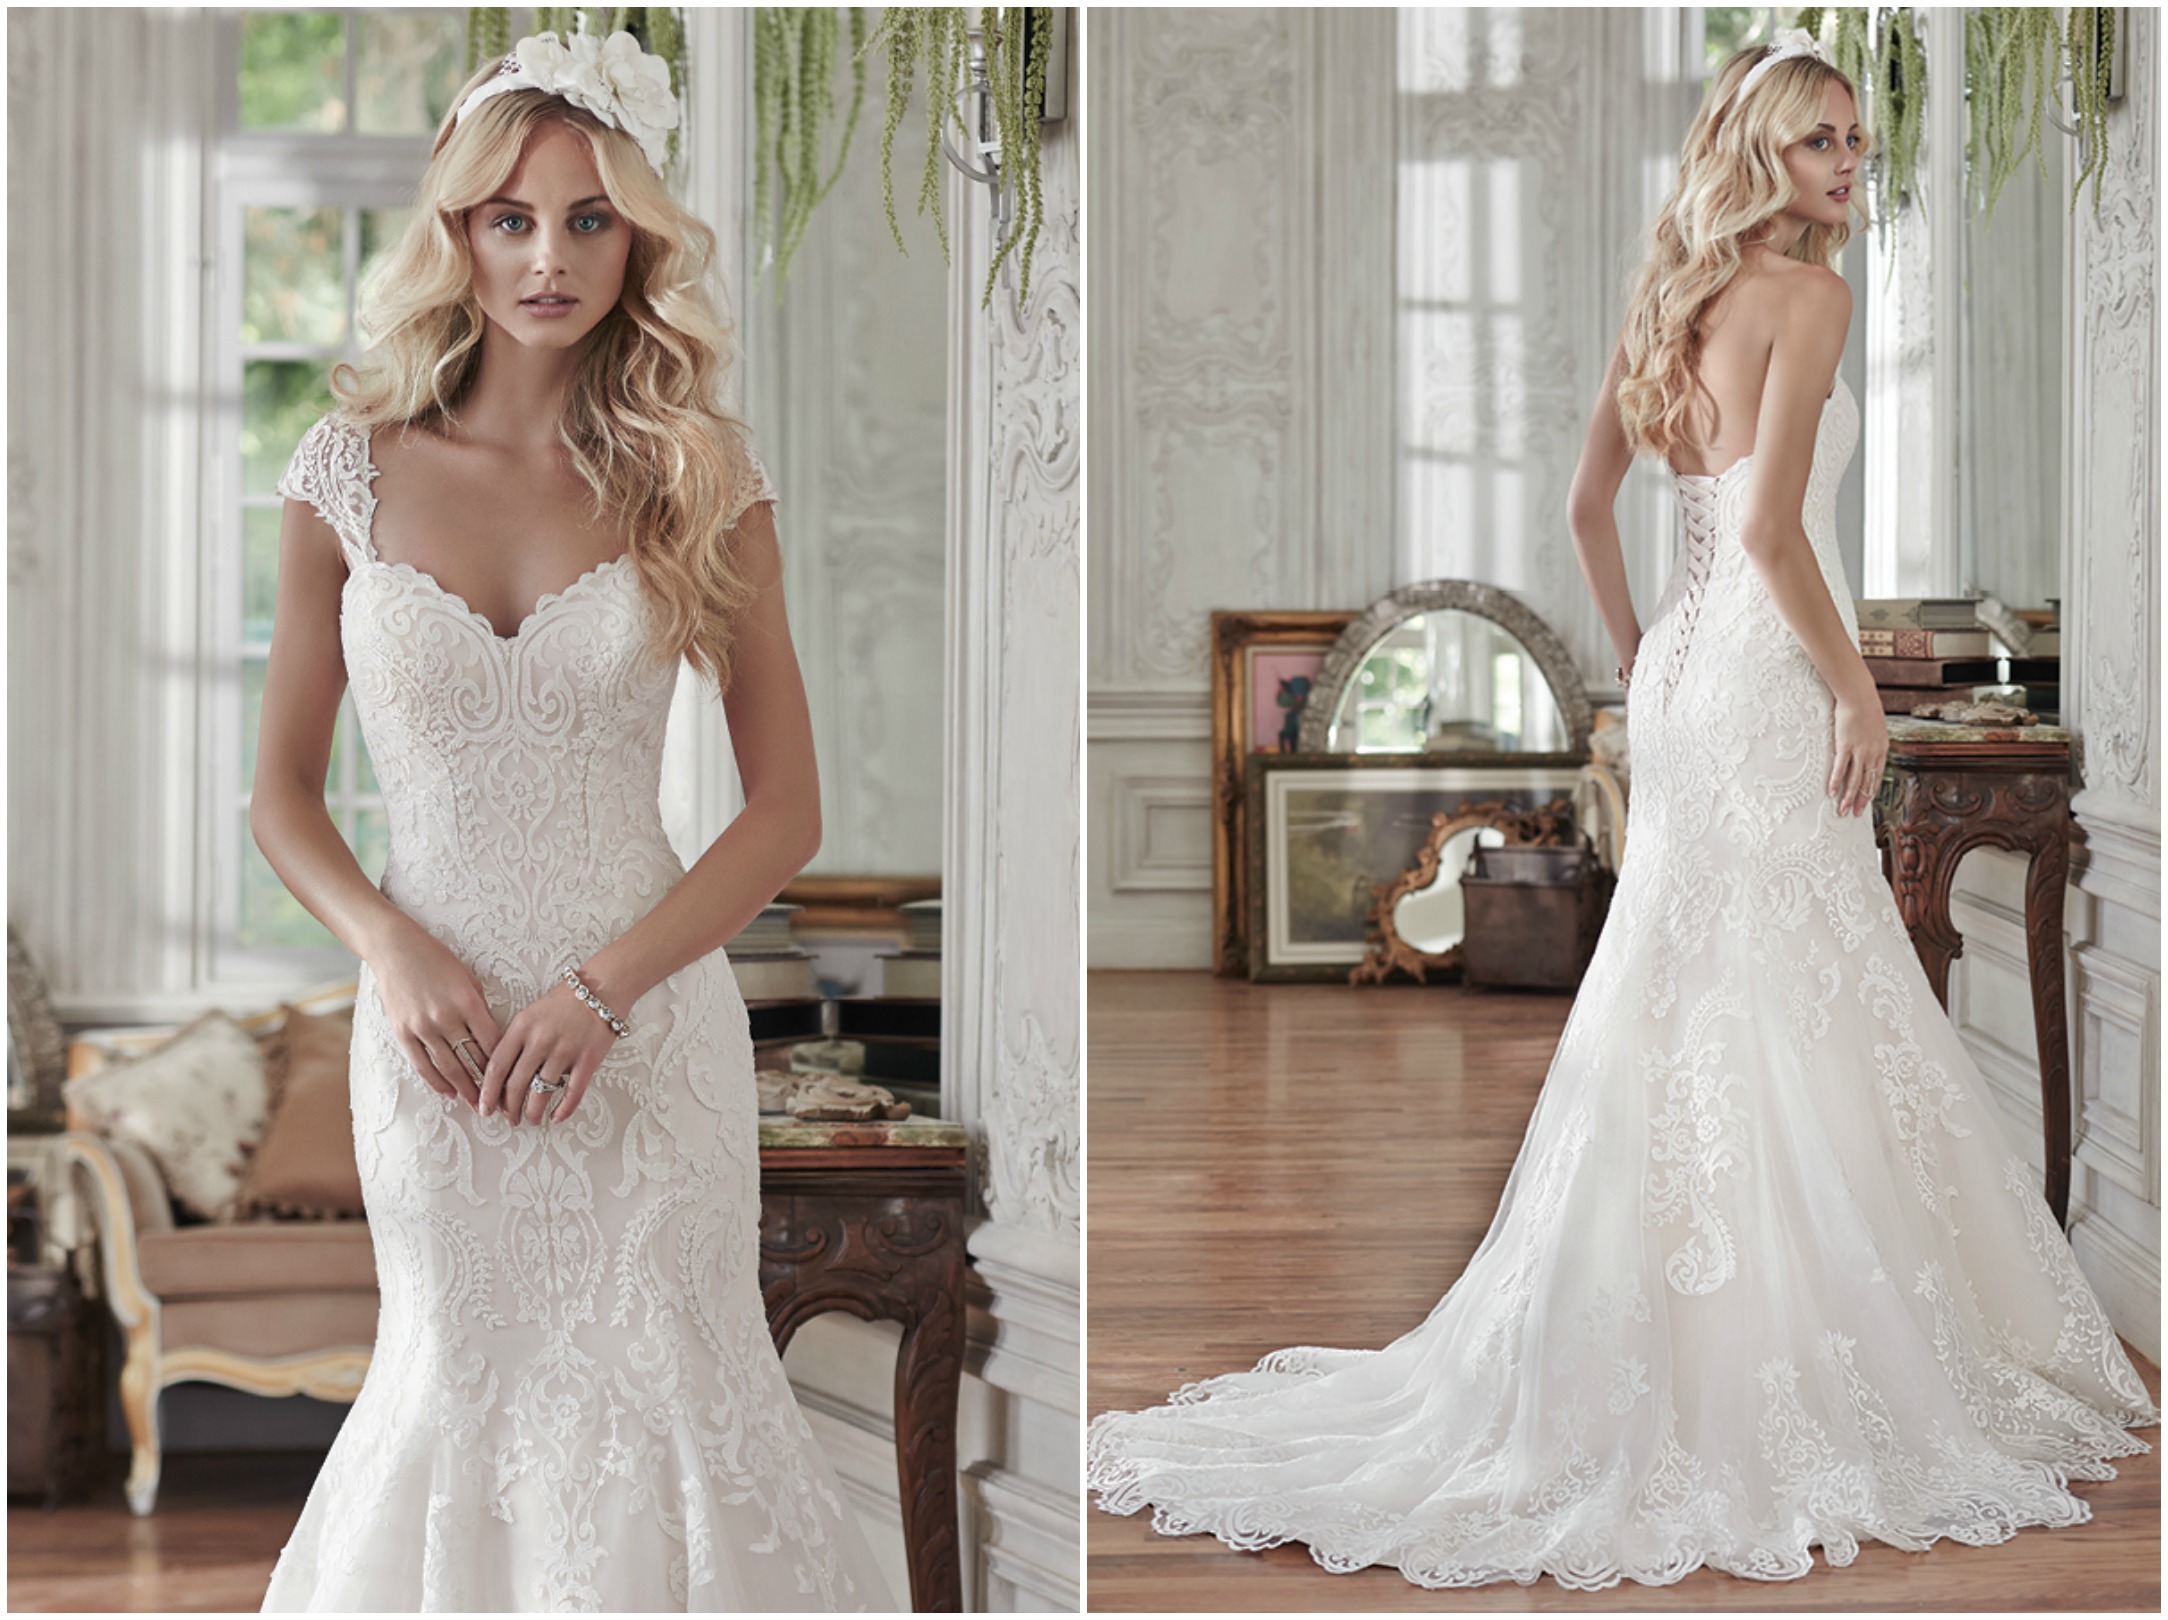 <a href="http://www.maggiesottero.com/maggie-sottero/rosamund/9524" target="_blank">Maggie Sottero Spring 2016</a>